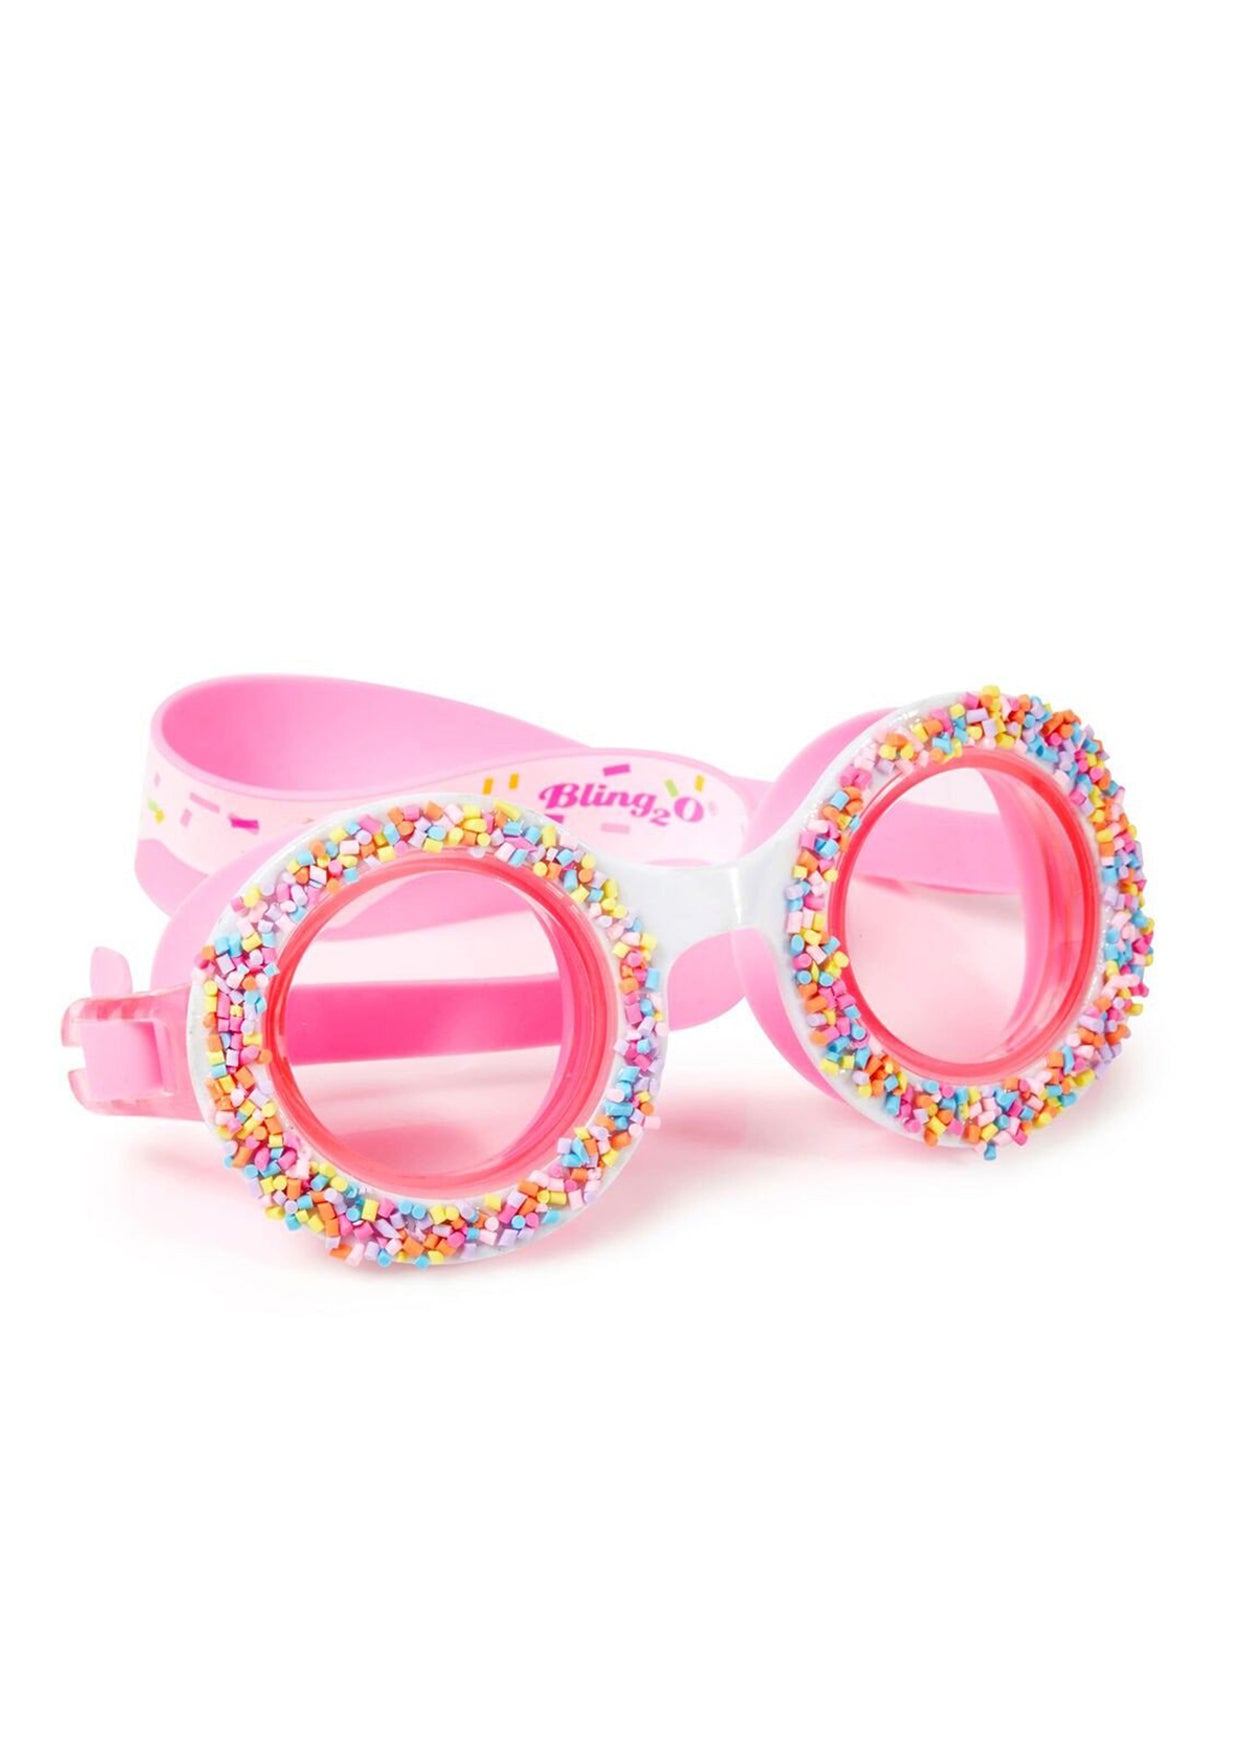 donut goggles for girls